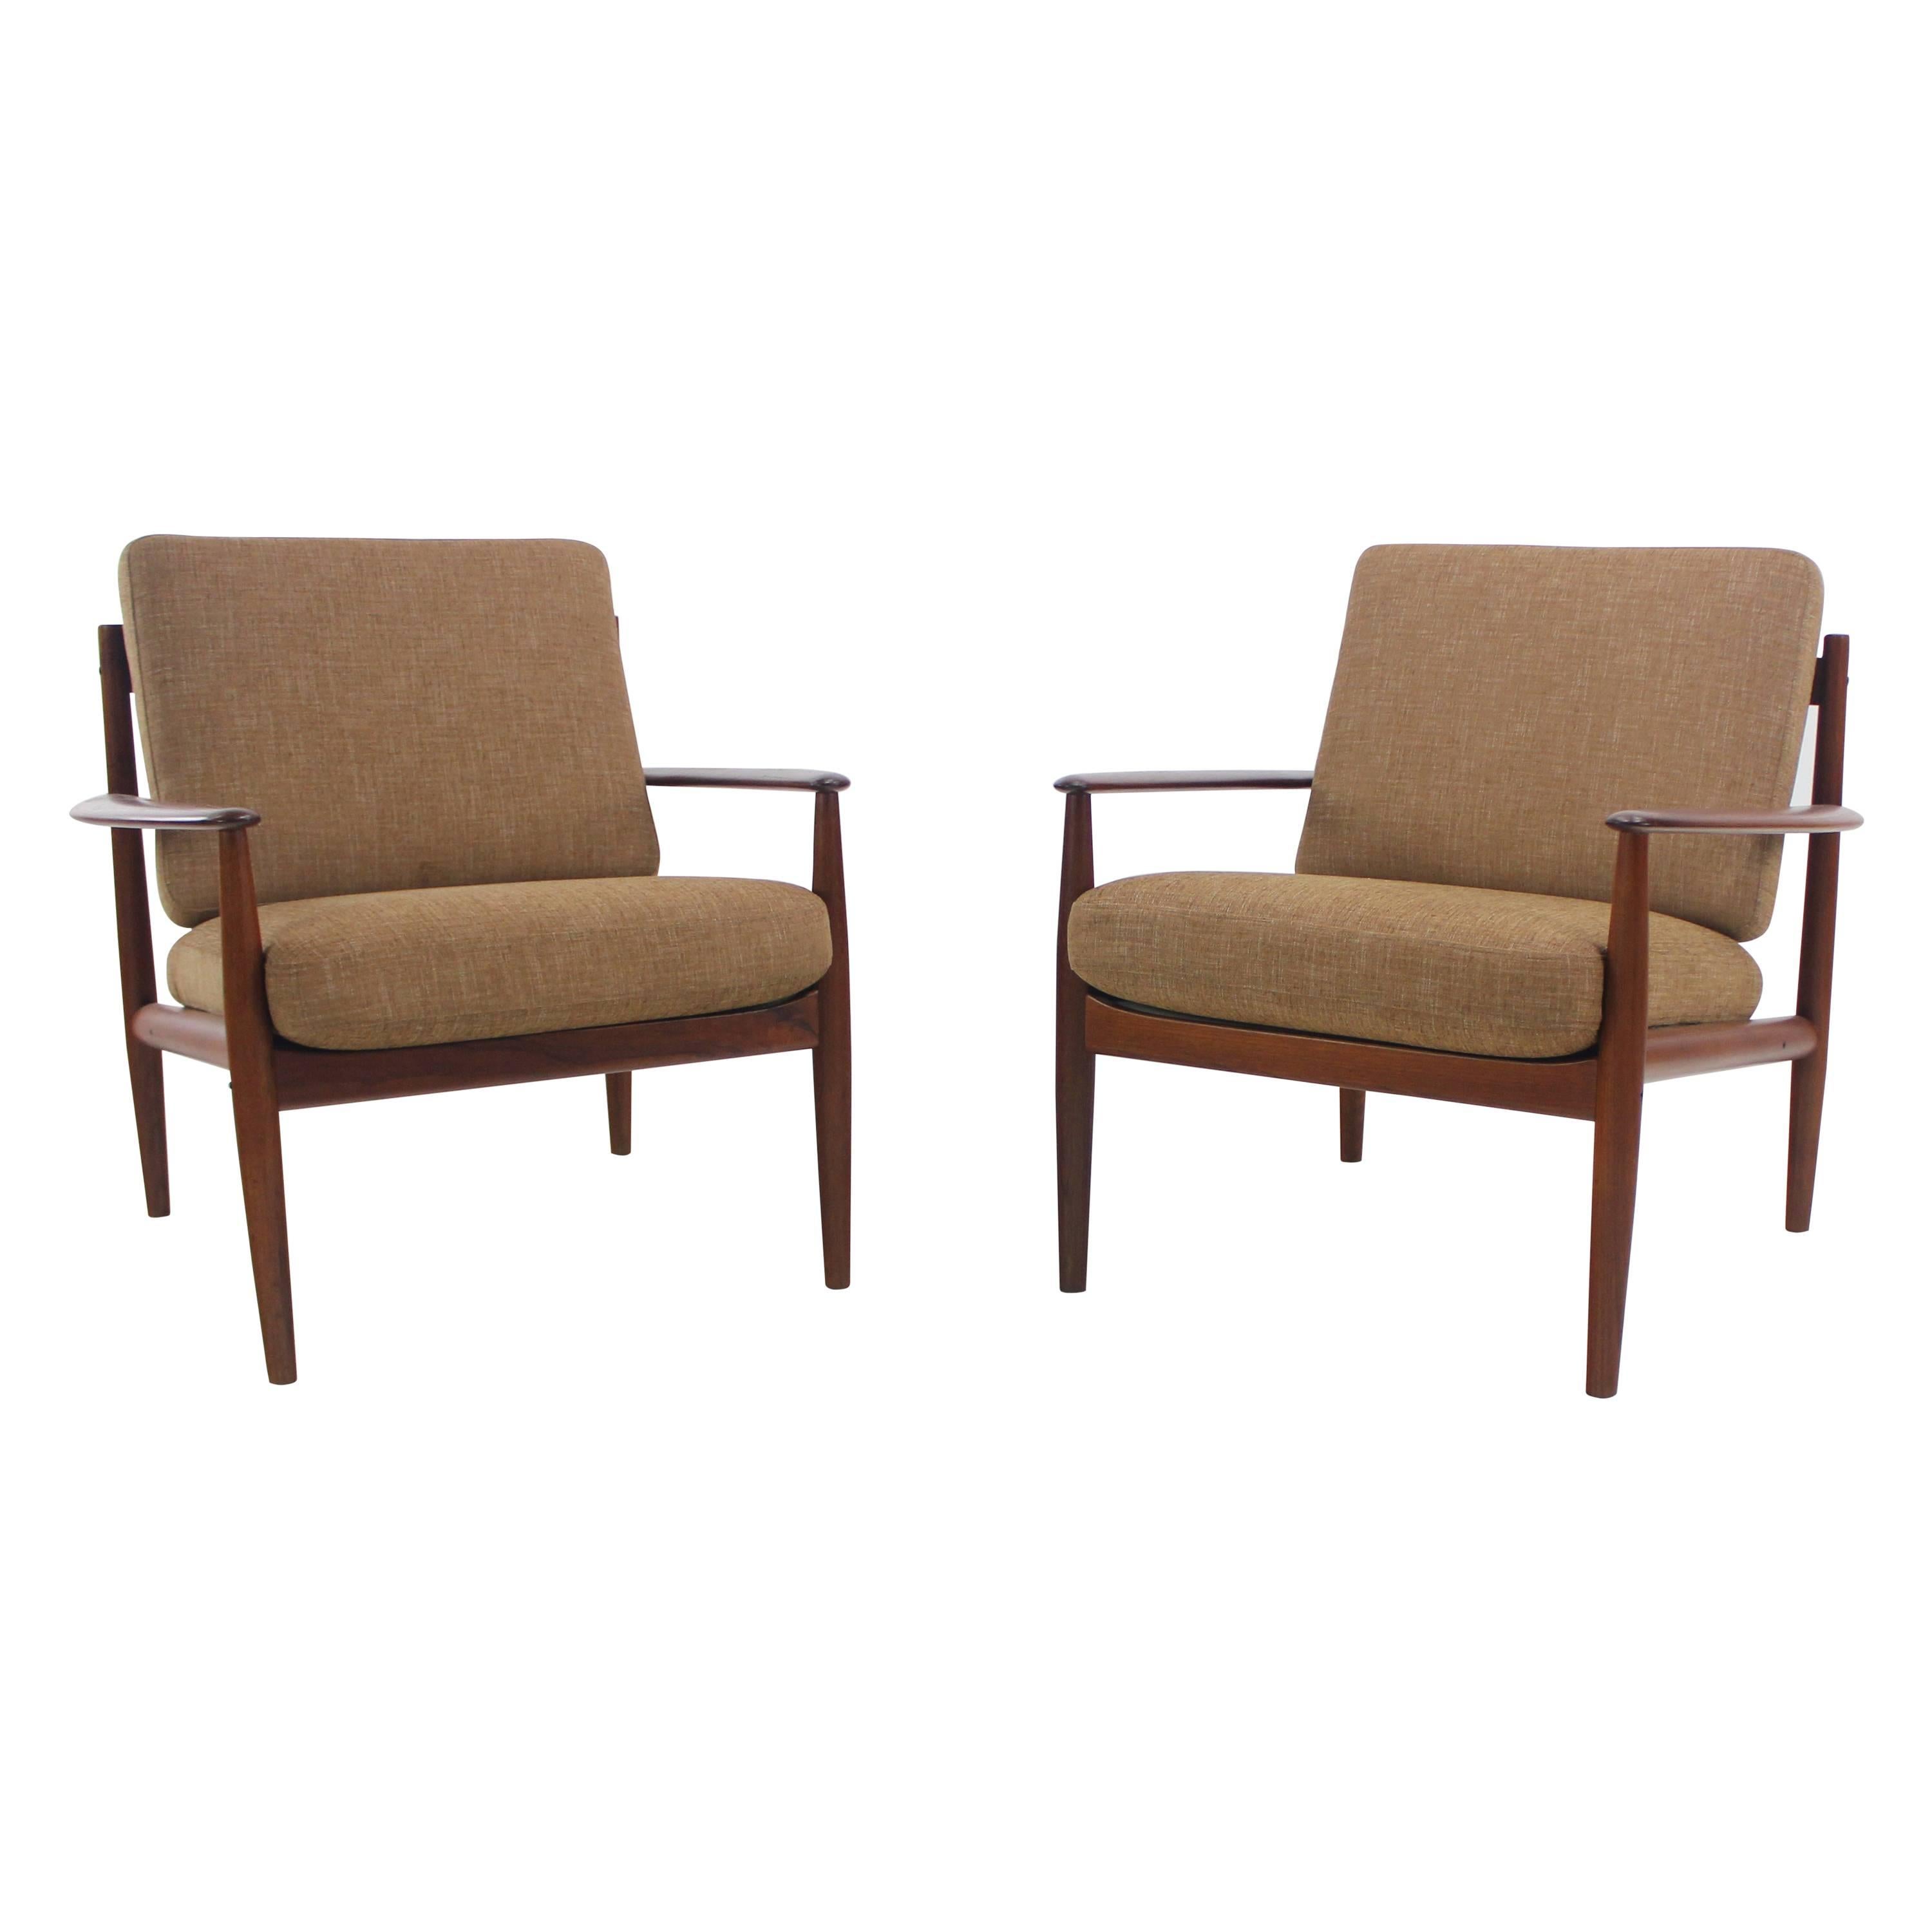 Pair of Danish Modern Teak Armchairs Designed by Grete Jalk For Sale